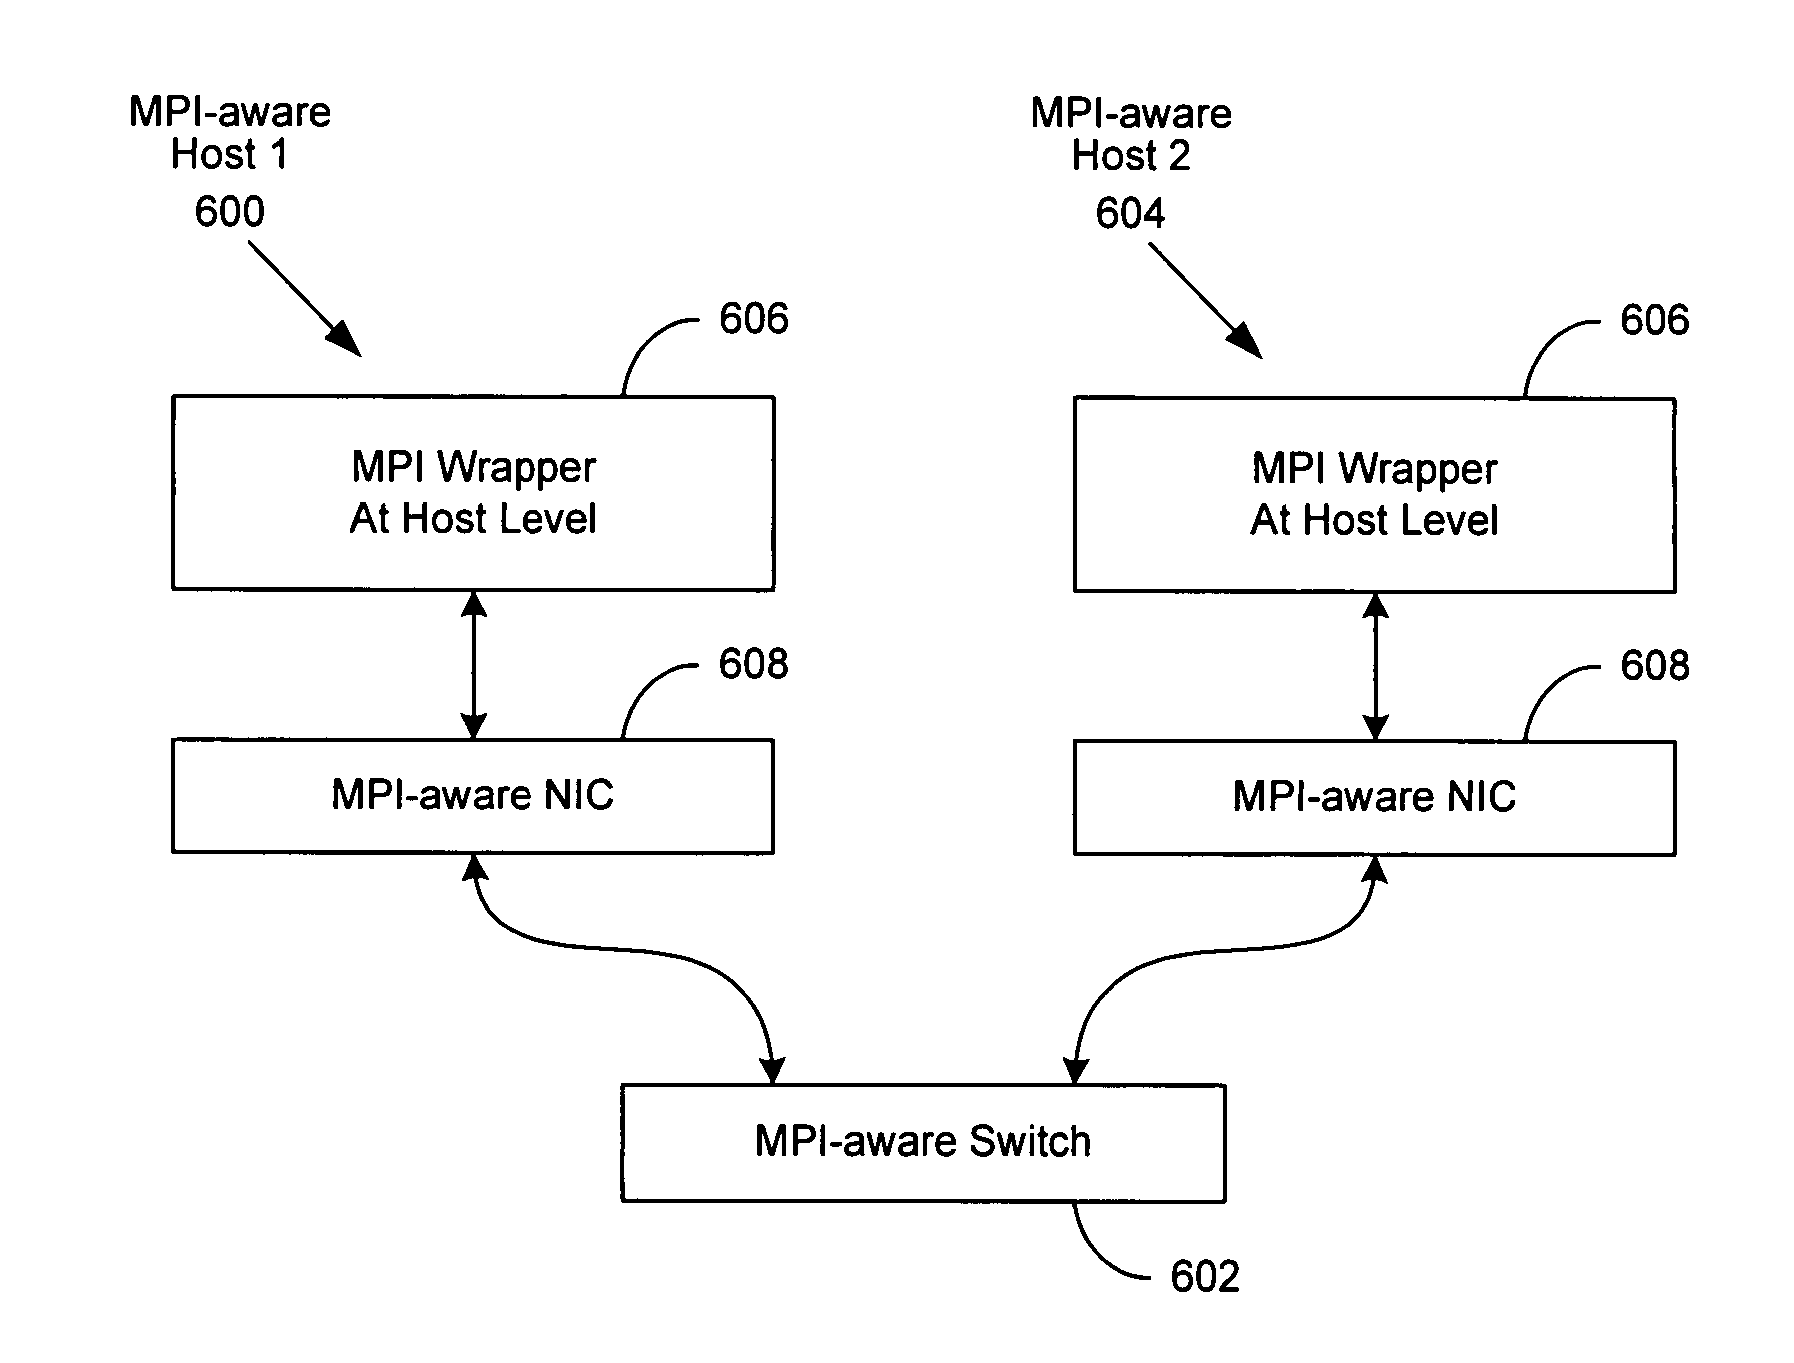 MPI-aware networking infrastructure